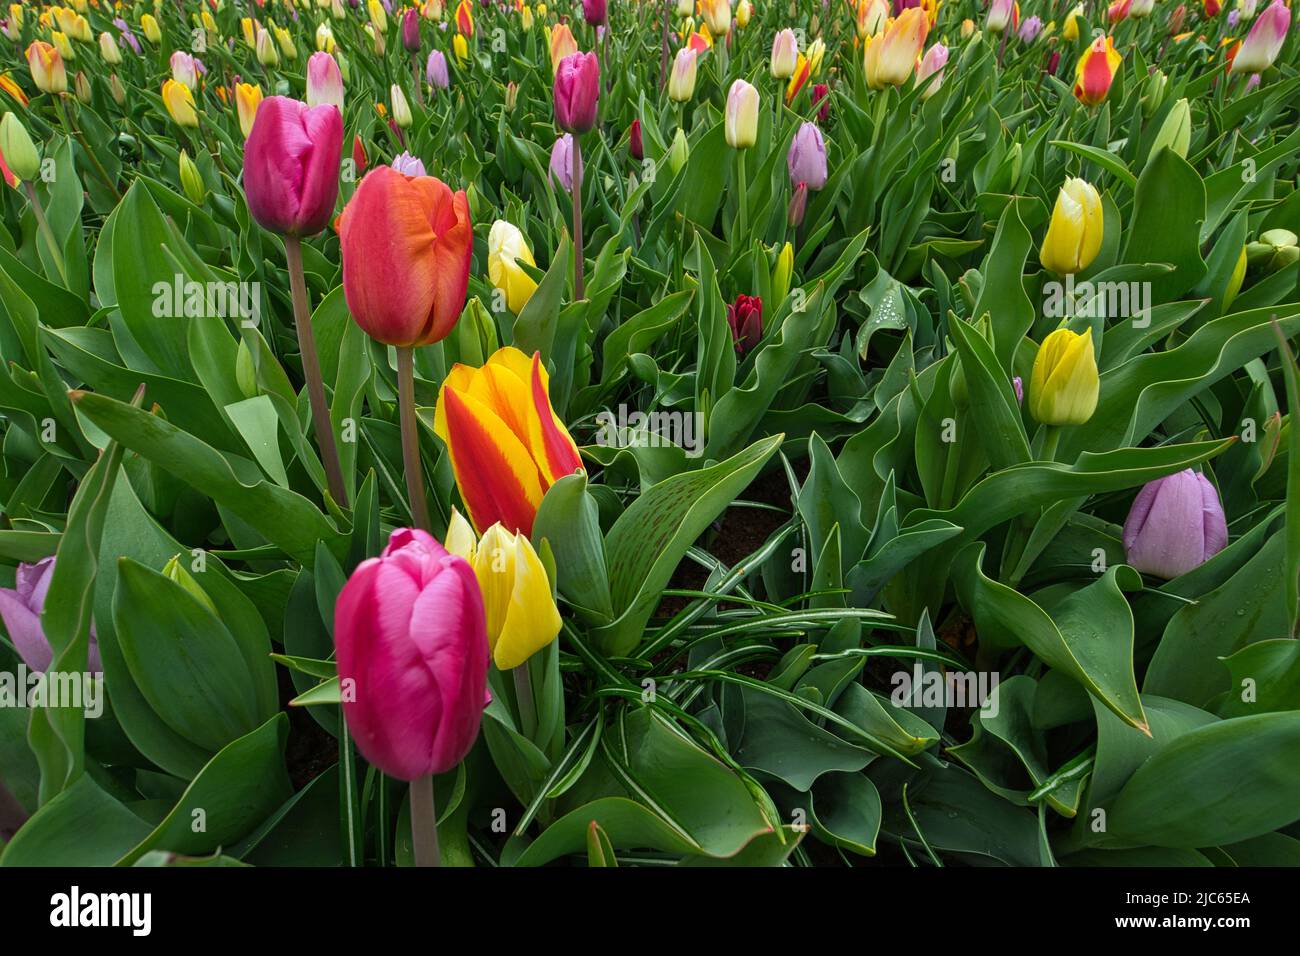 A close up of a flower meadow with colorful tulips Stock Photo